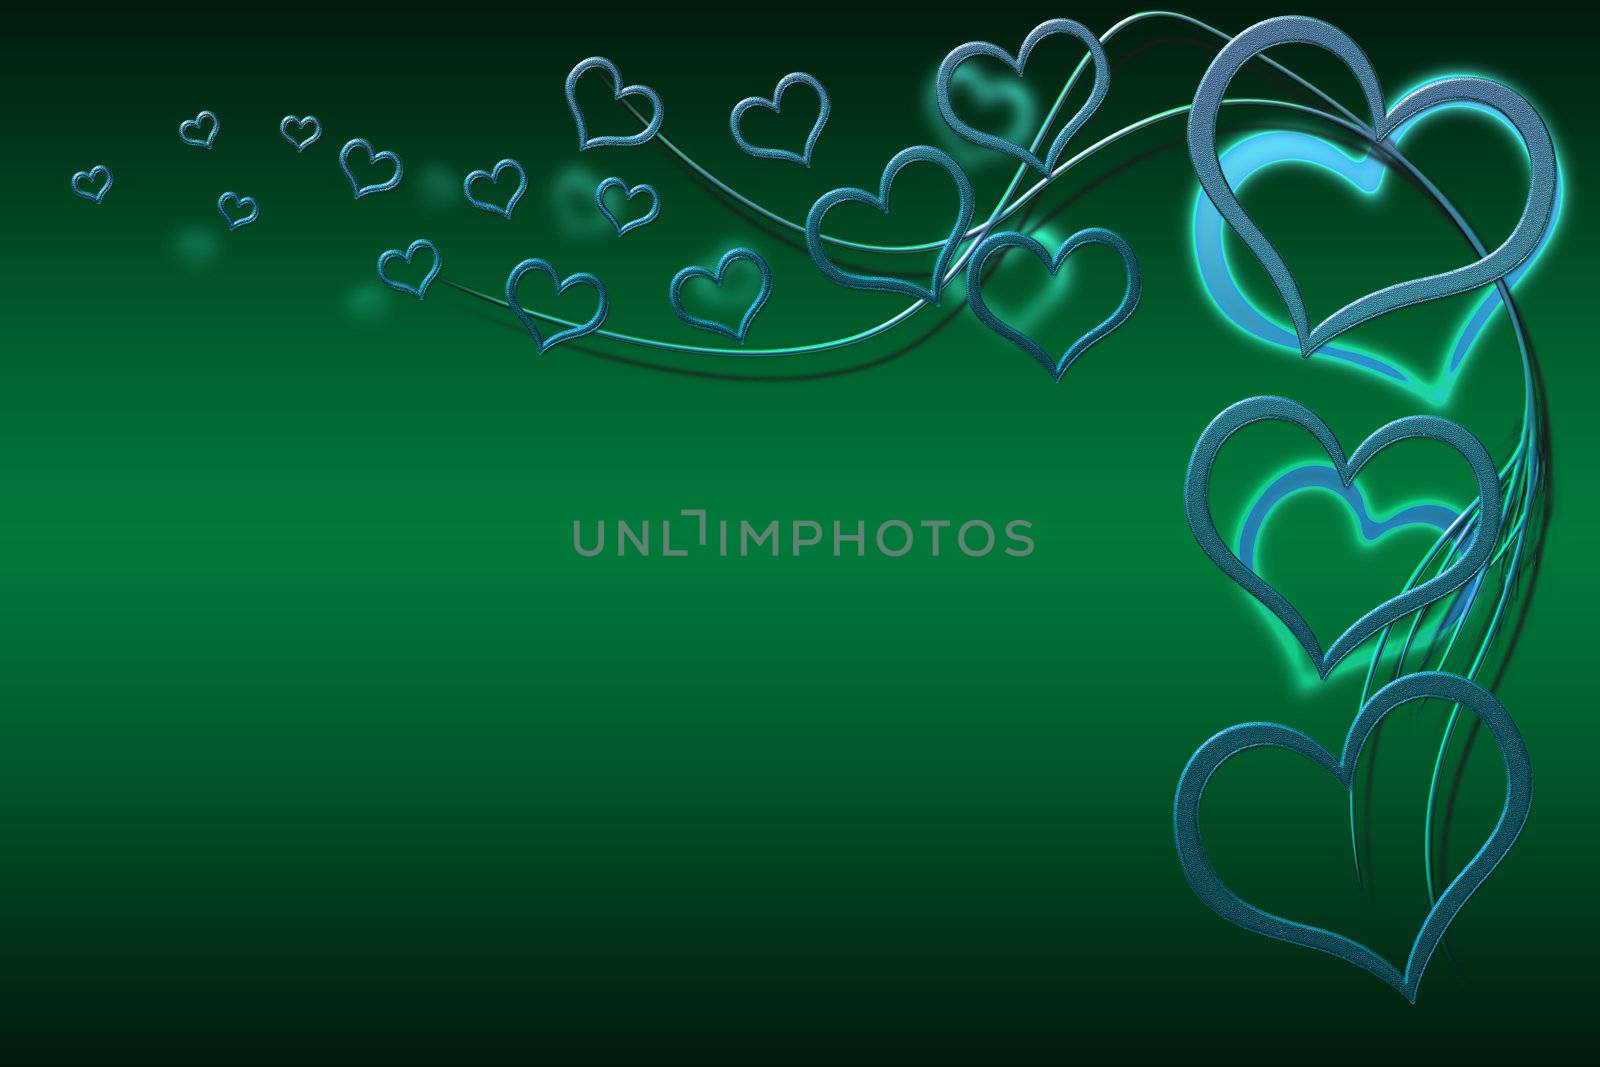 Valentines day background for your designs with turquoise hearts and swirls on green background